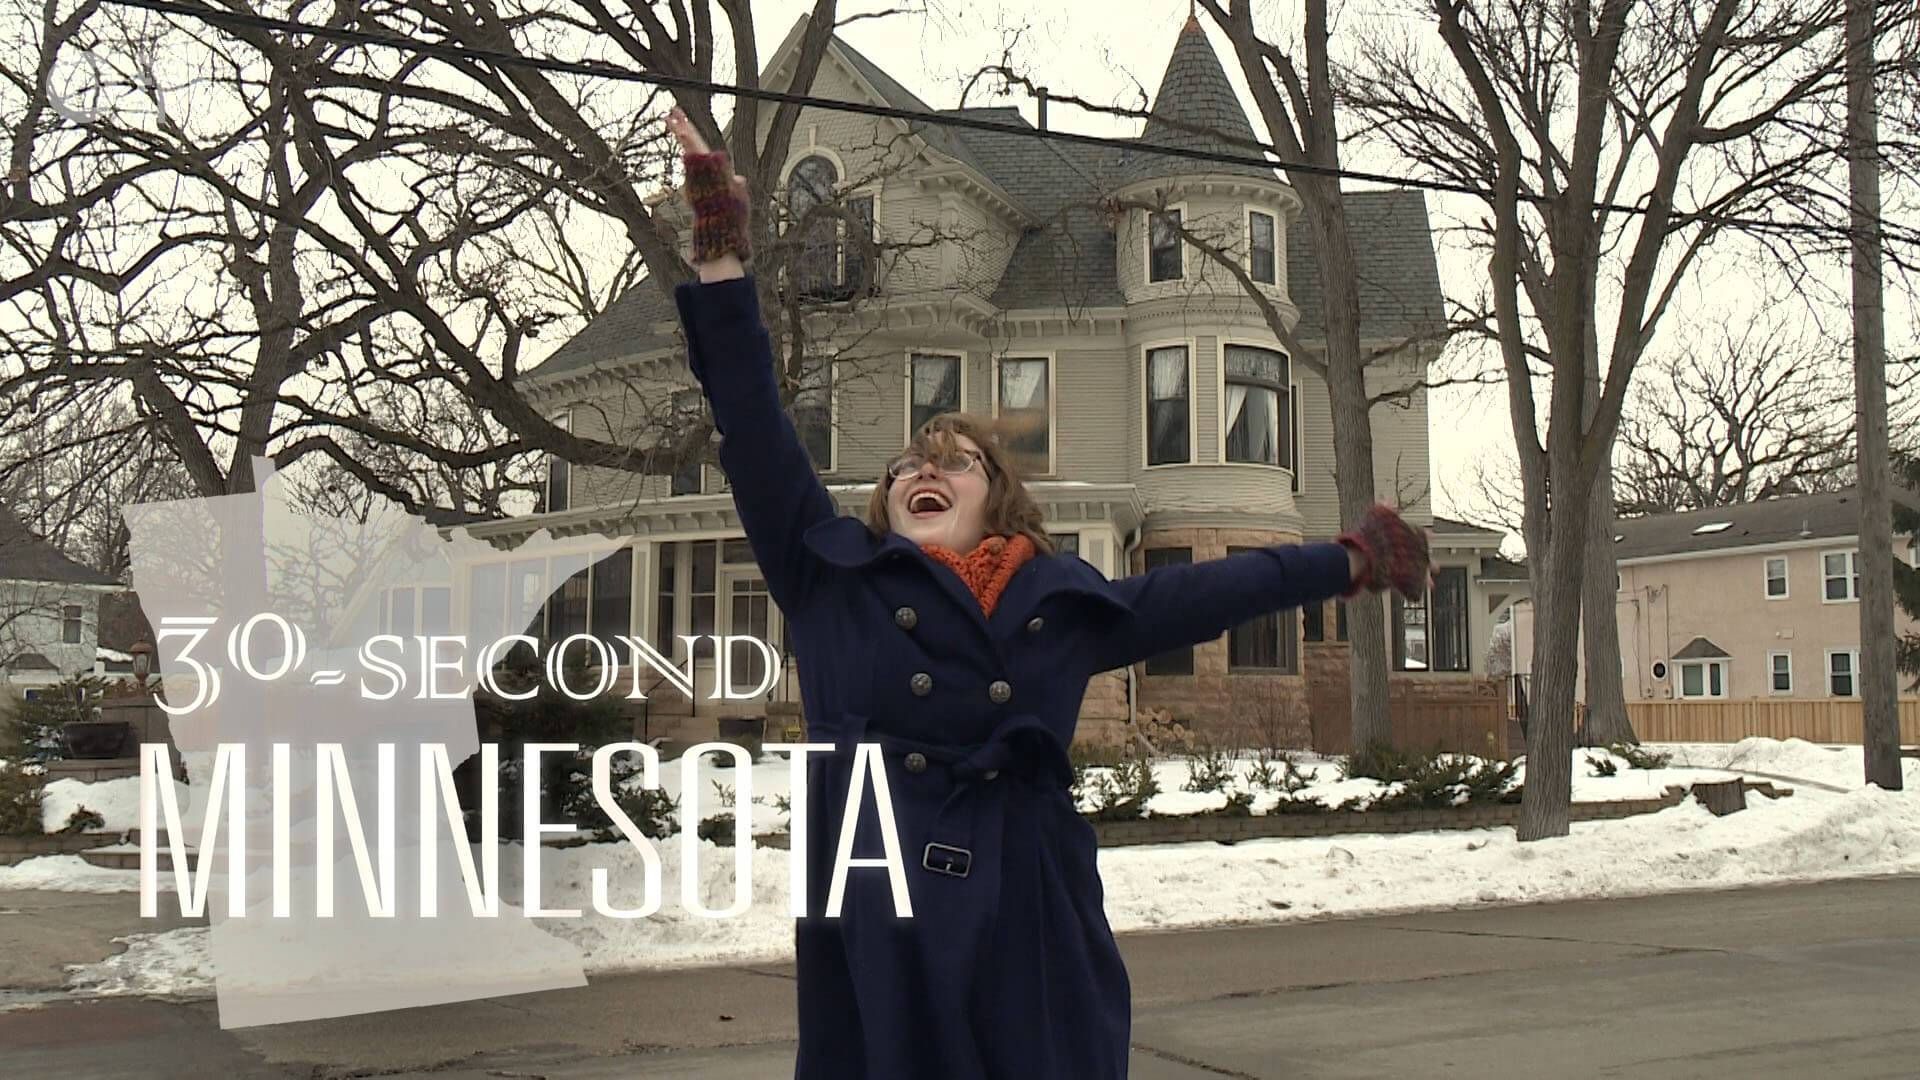 30-Second Minnesota: The Mary Tyler Moore Show Put Mpls on the Map